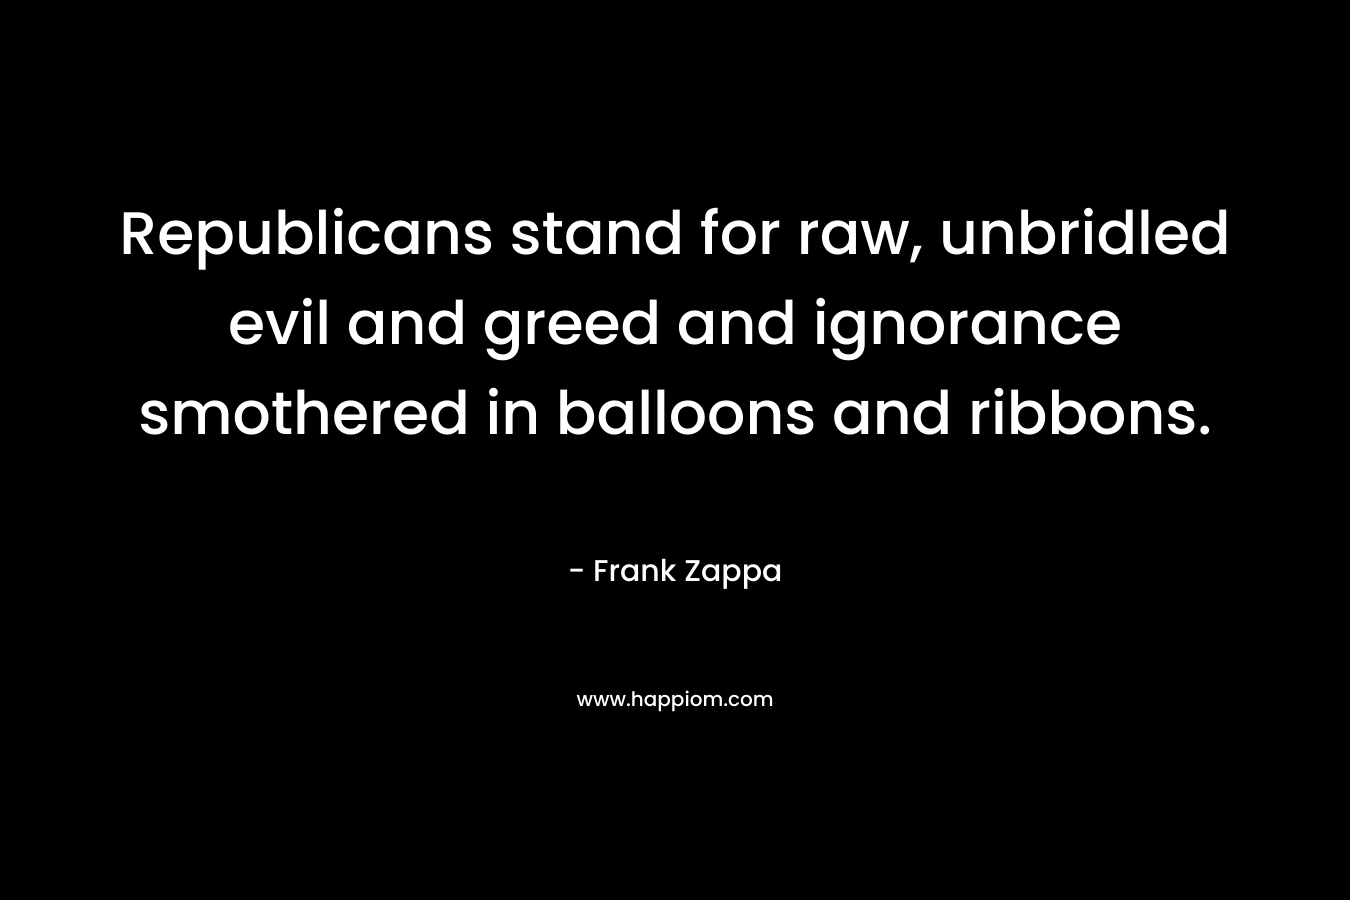 Republicans stand for raw, unbridled evil and greed and ignorance smothered in balloons and ribbons. – Frank Zappa